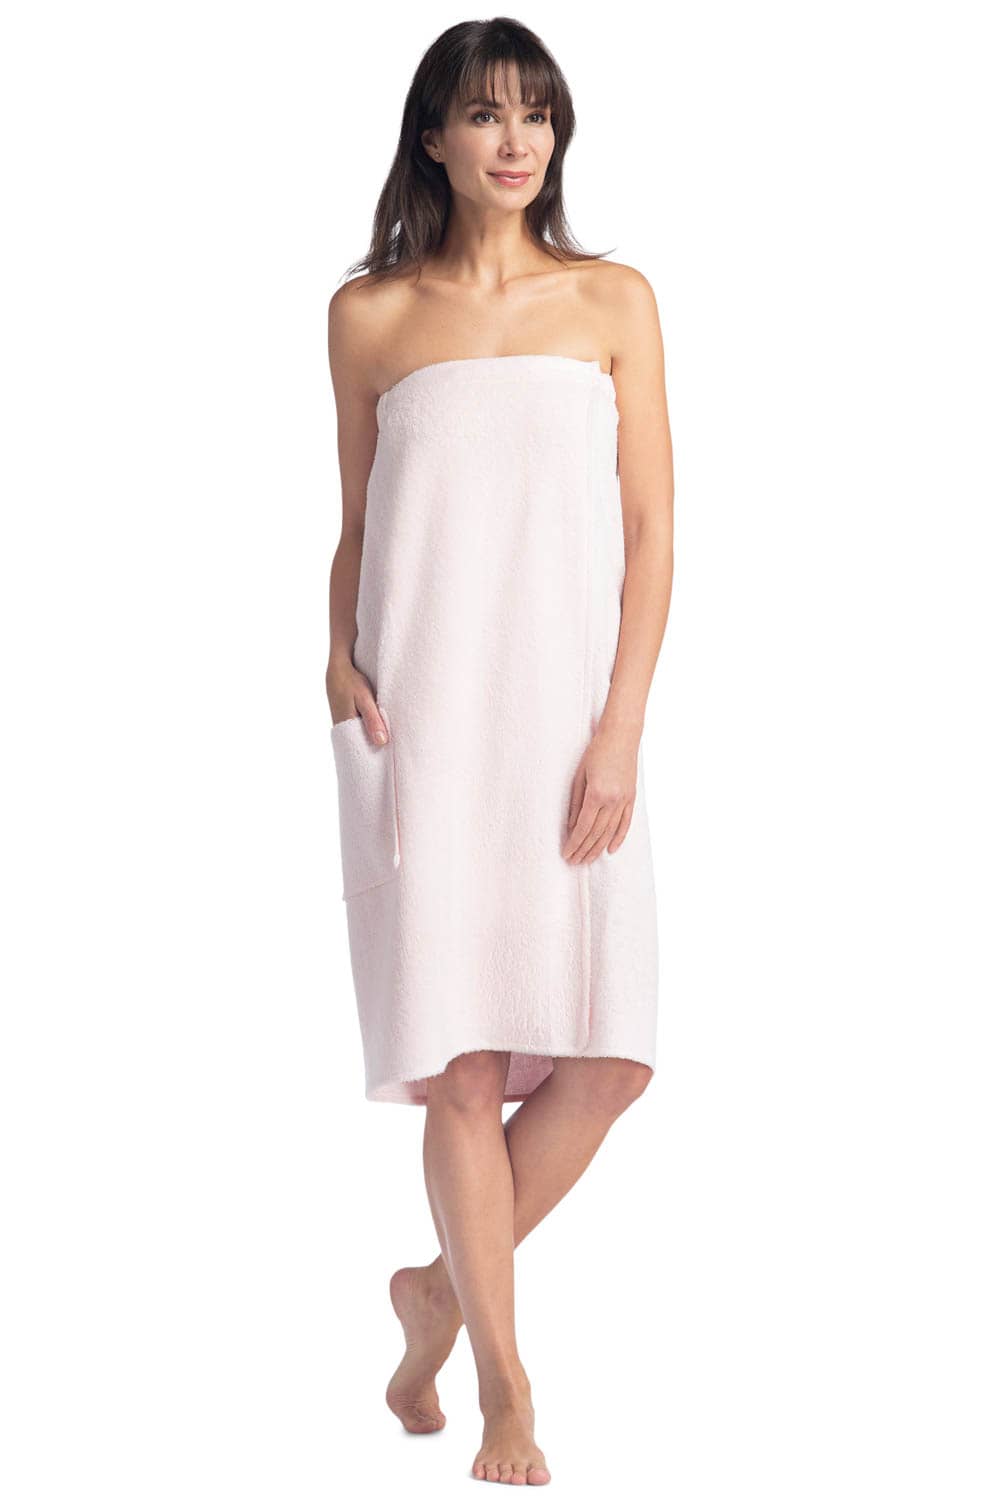 Fishers Finery Women's EcoFabric Terry Cloth Spa Package; Body Wrap & Hair Towel (White)